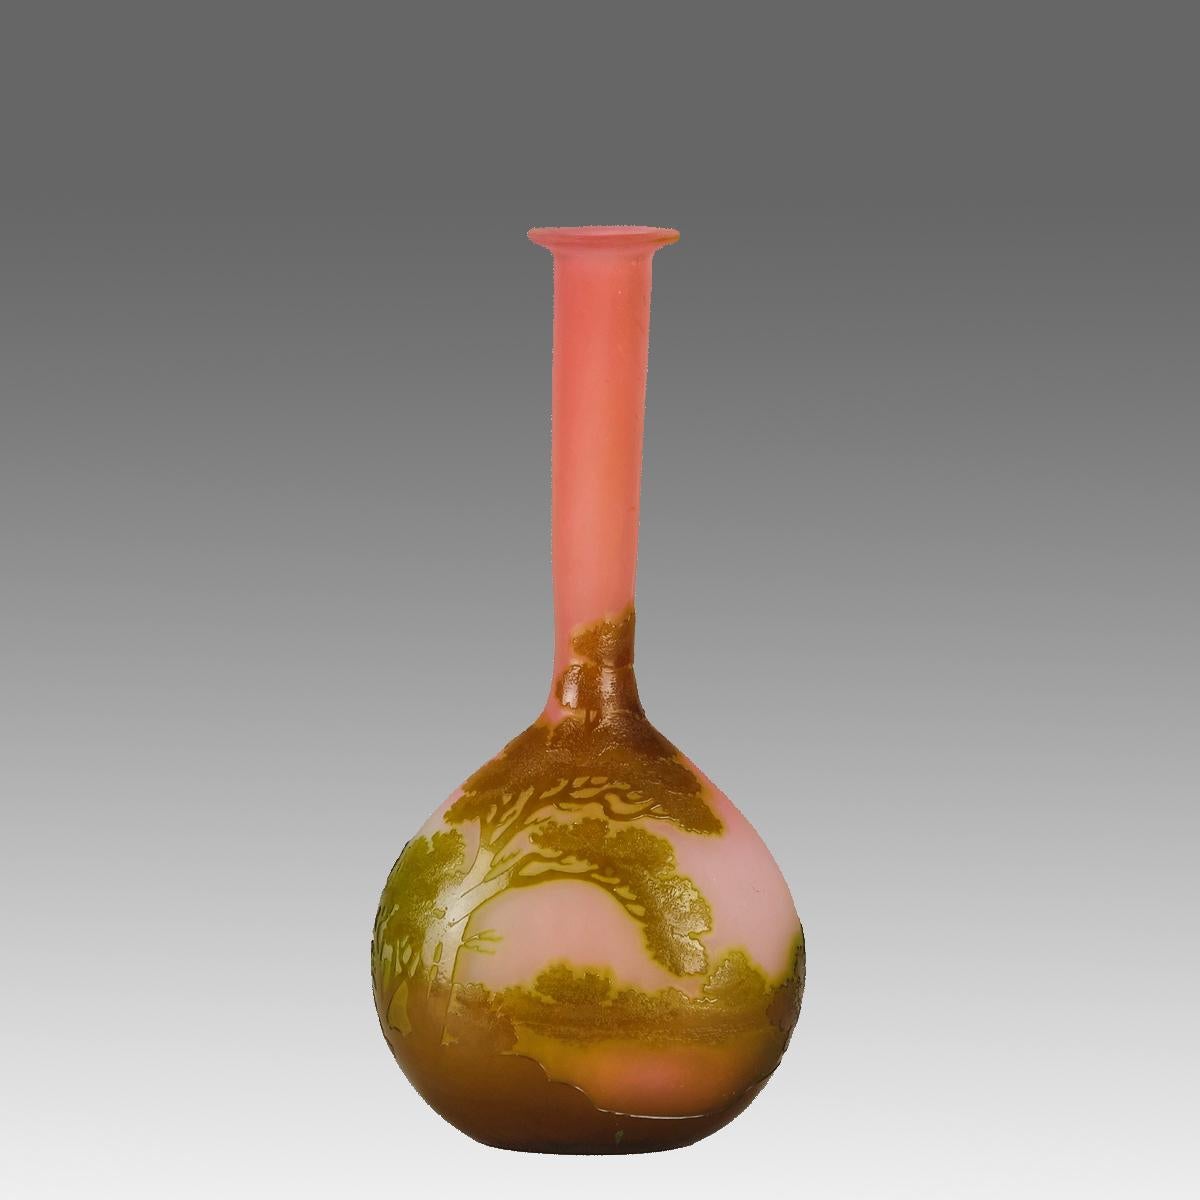 A fabulous late 19th Century French cameo glass vase decorated with a lime coloured landscape against a warm pink background. Exhibiting excellent detail and colour, signed Galle in cameo.

ADDITIONAL INFORMATION
Height:                             